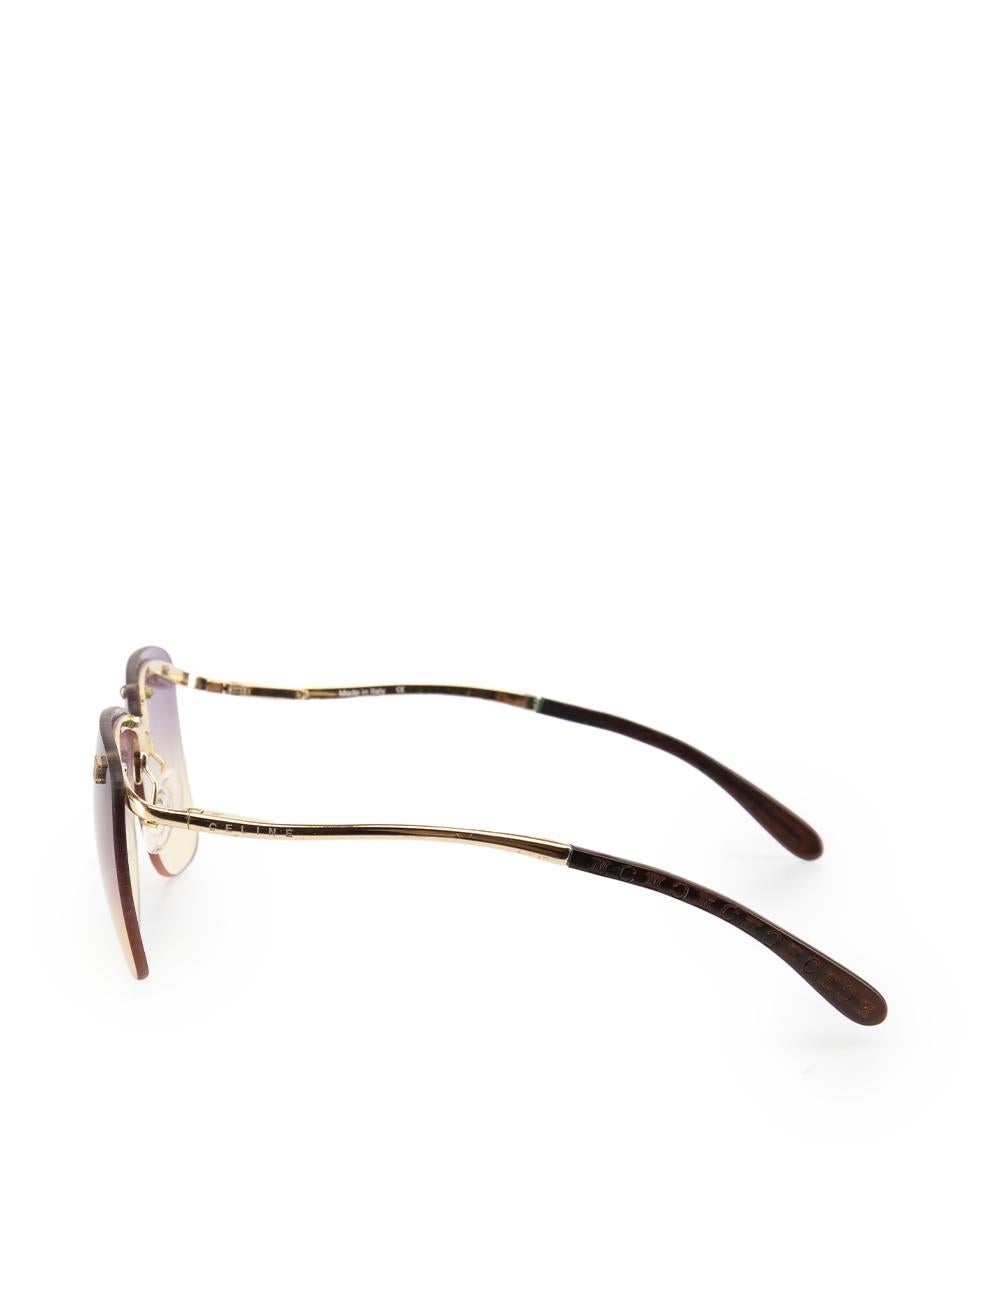 CONDITION is Very good. Minimal wear to sunglasses is evident. Minimal wear to right lens corner with light abrasion and the logo screws at the lenses show signs of tarnishing on this used Céline designer resale item. These sunglasses come with